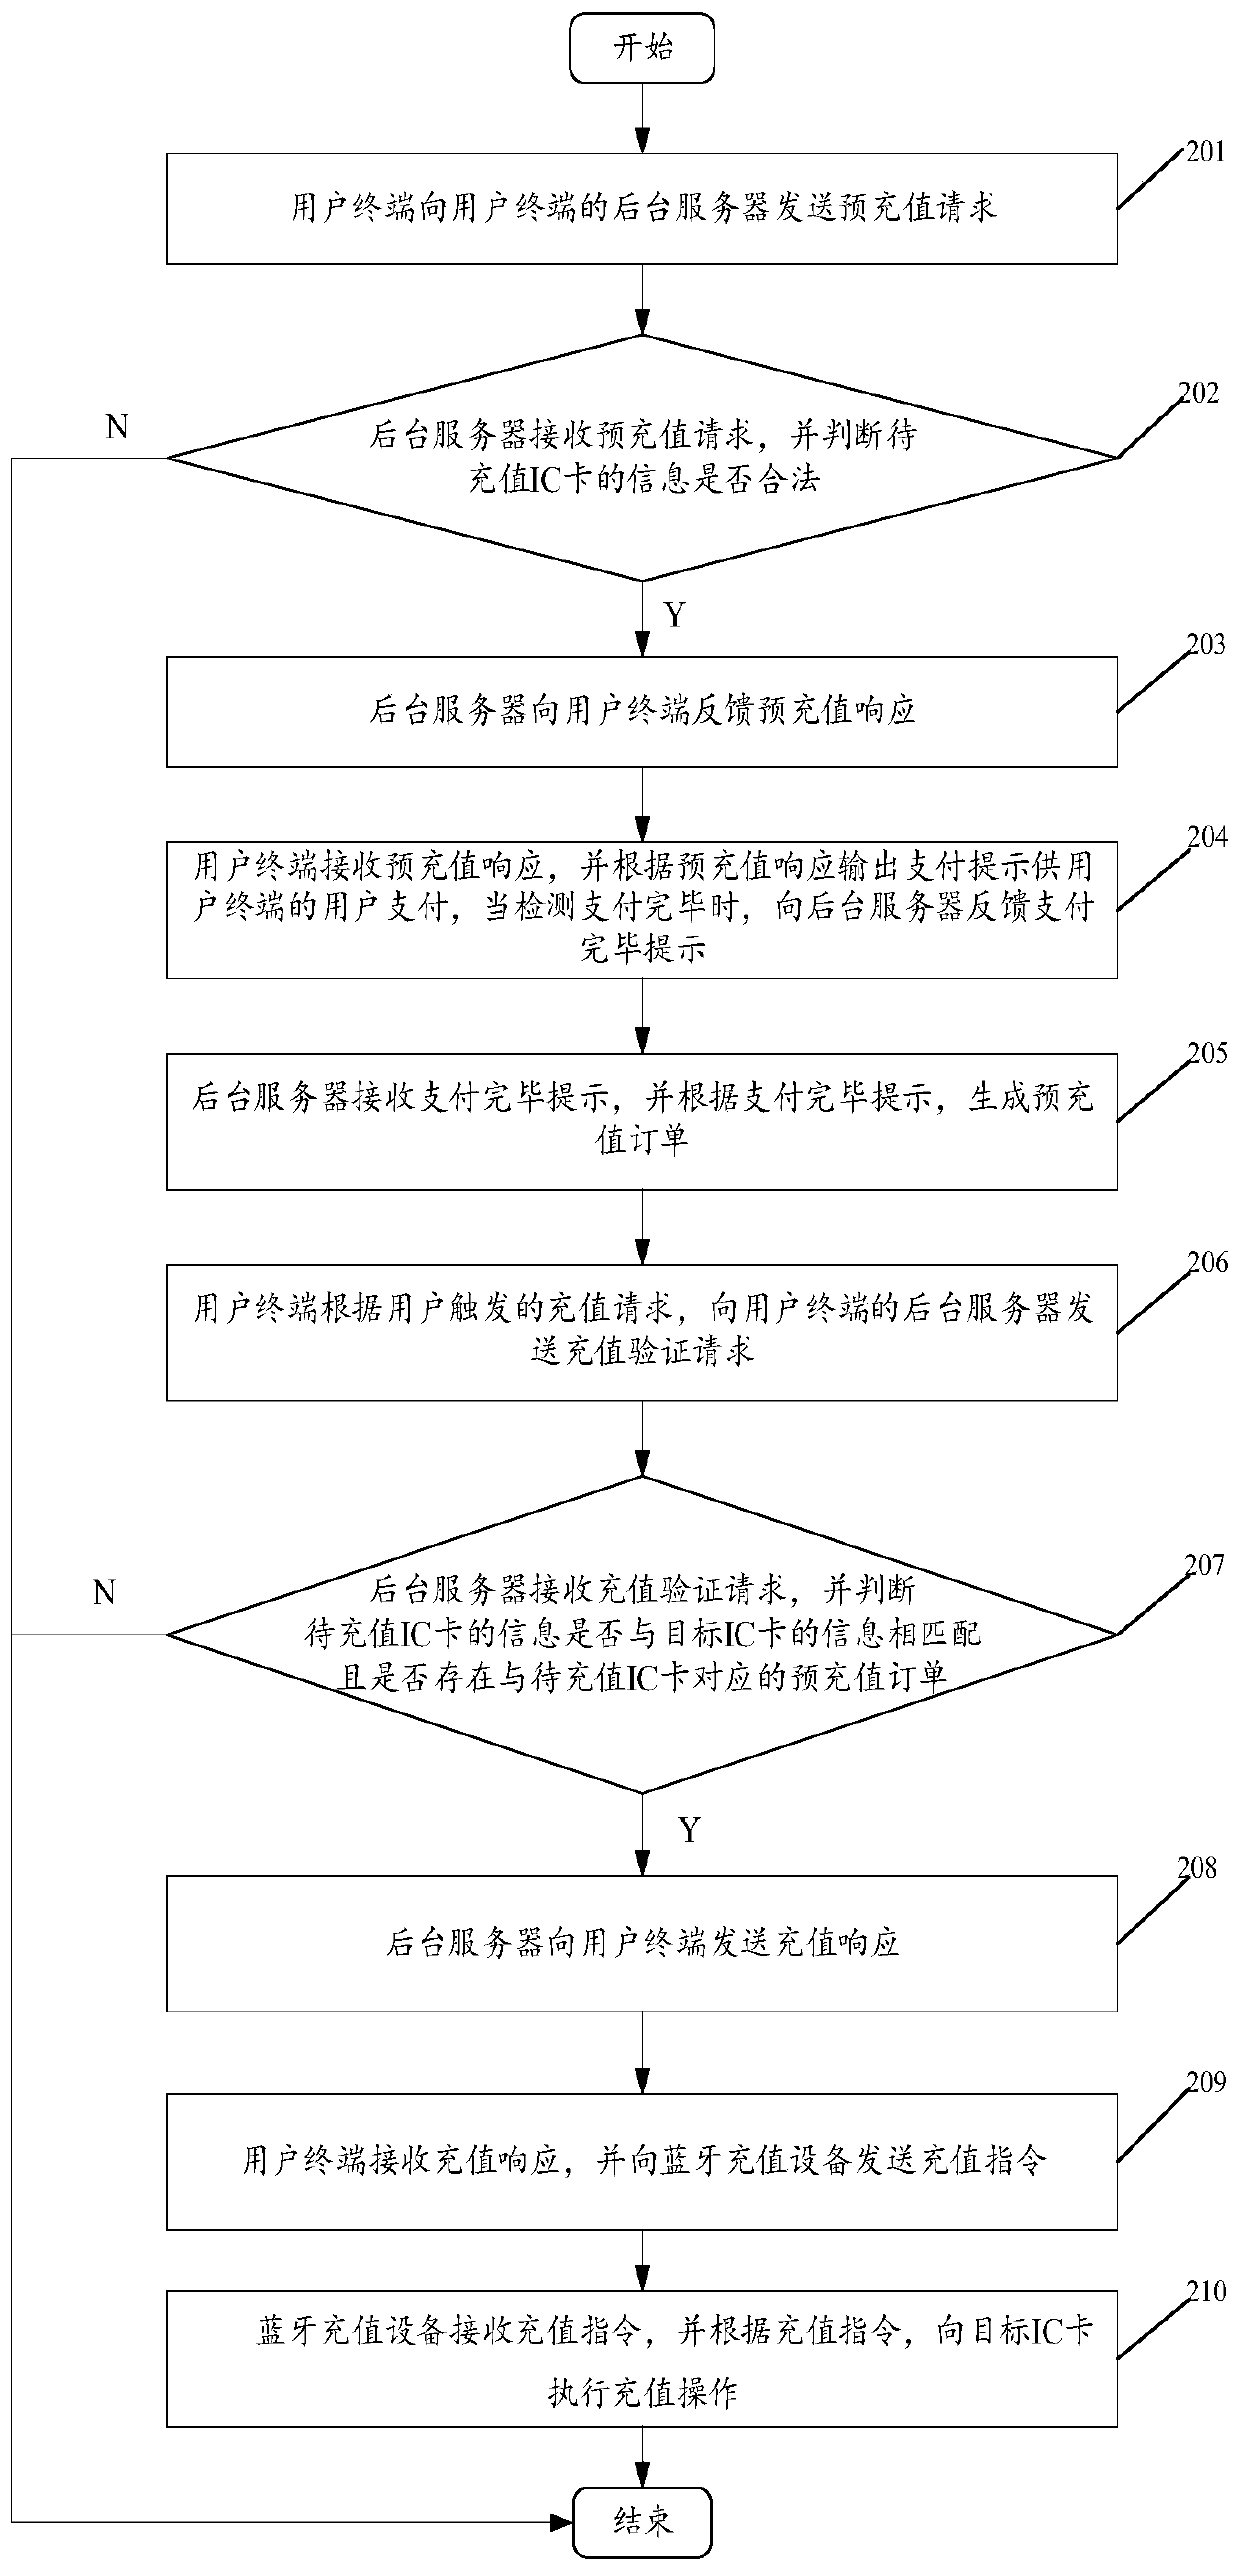 Bluetooth recharging implementation method and system